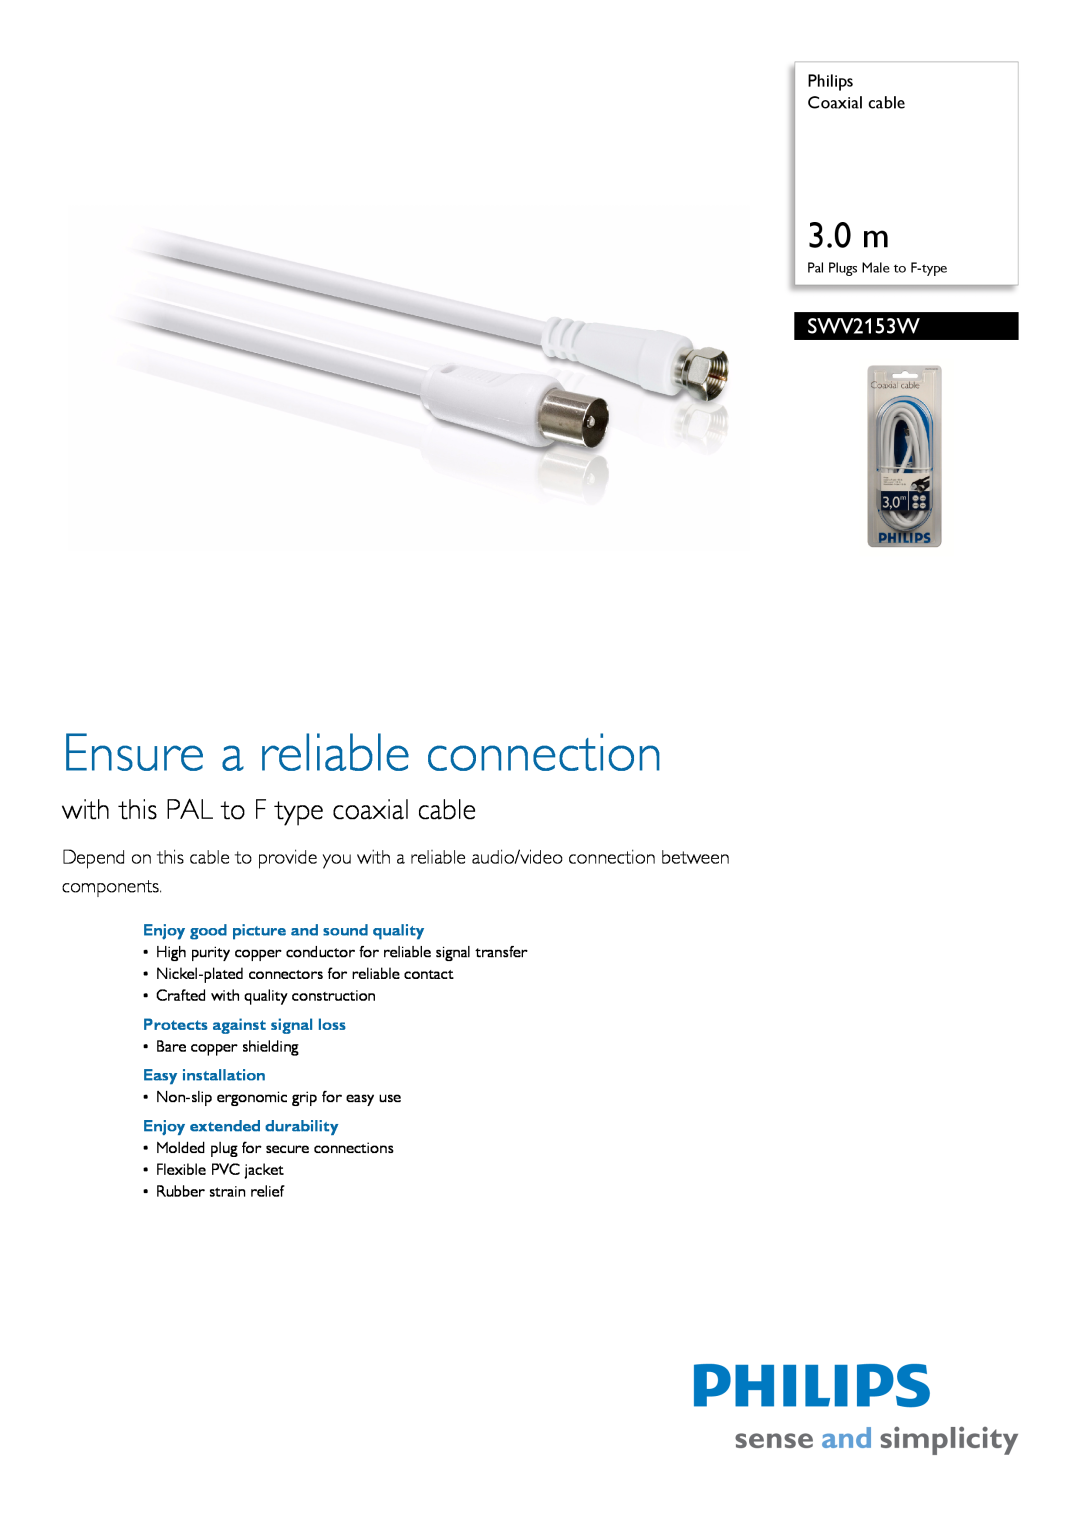 Philips SWV2153W manual Philips Coaxial cable, Ensure a reliable connection, 3.0 m, with this PAL to F type coaxial cable 